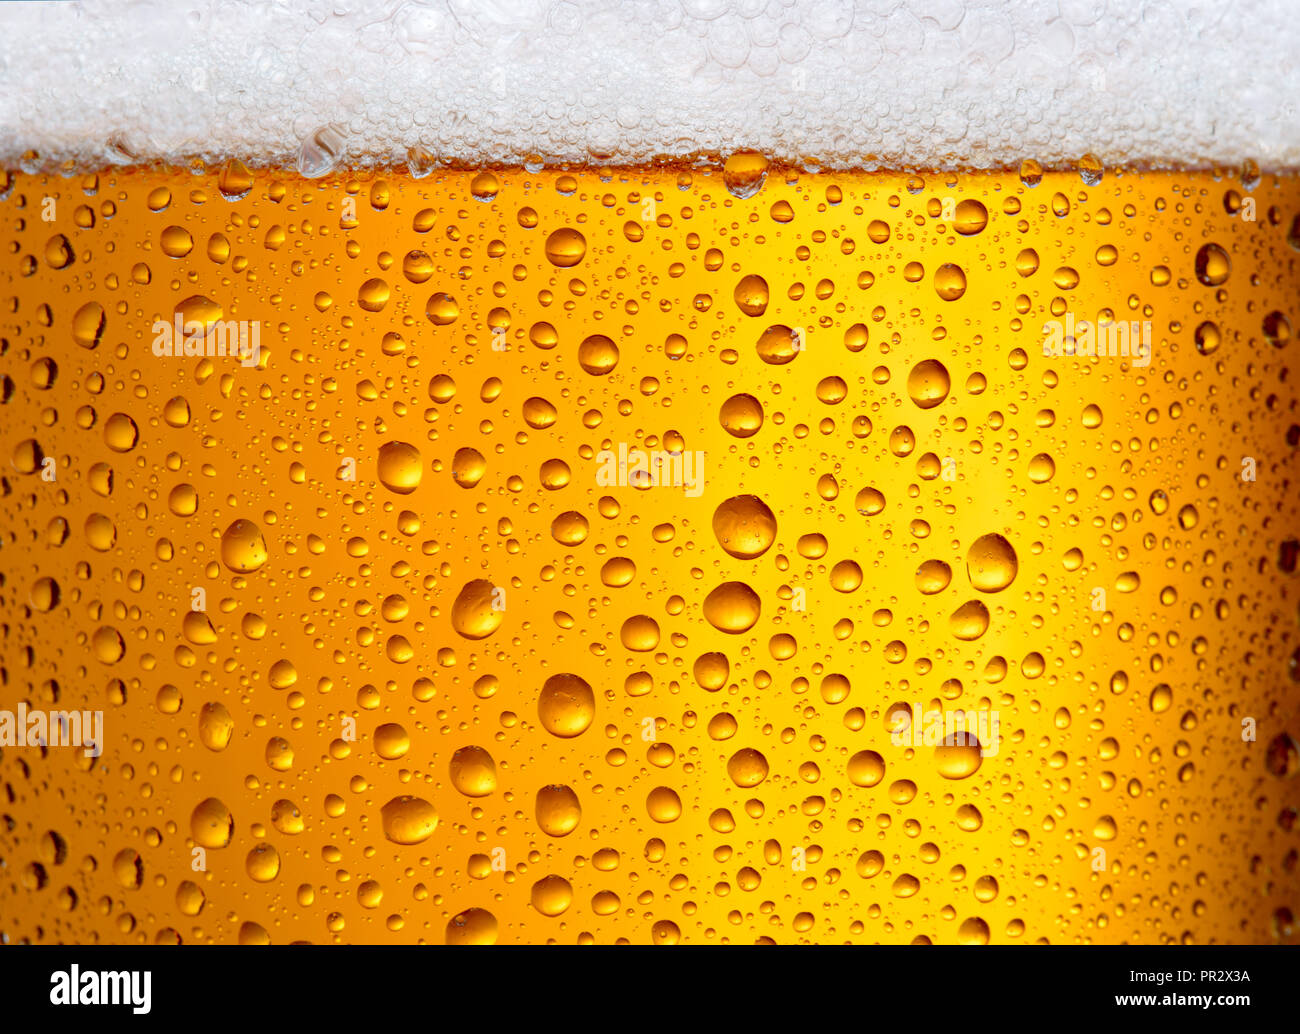 close-up view of glass of beer with drops and froth as textured background Stock Photo